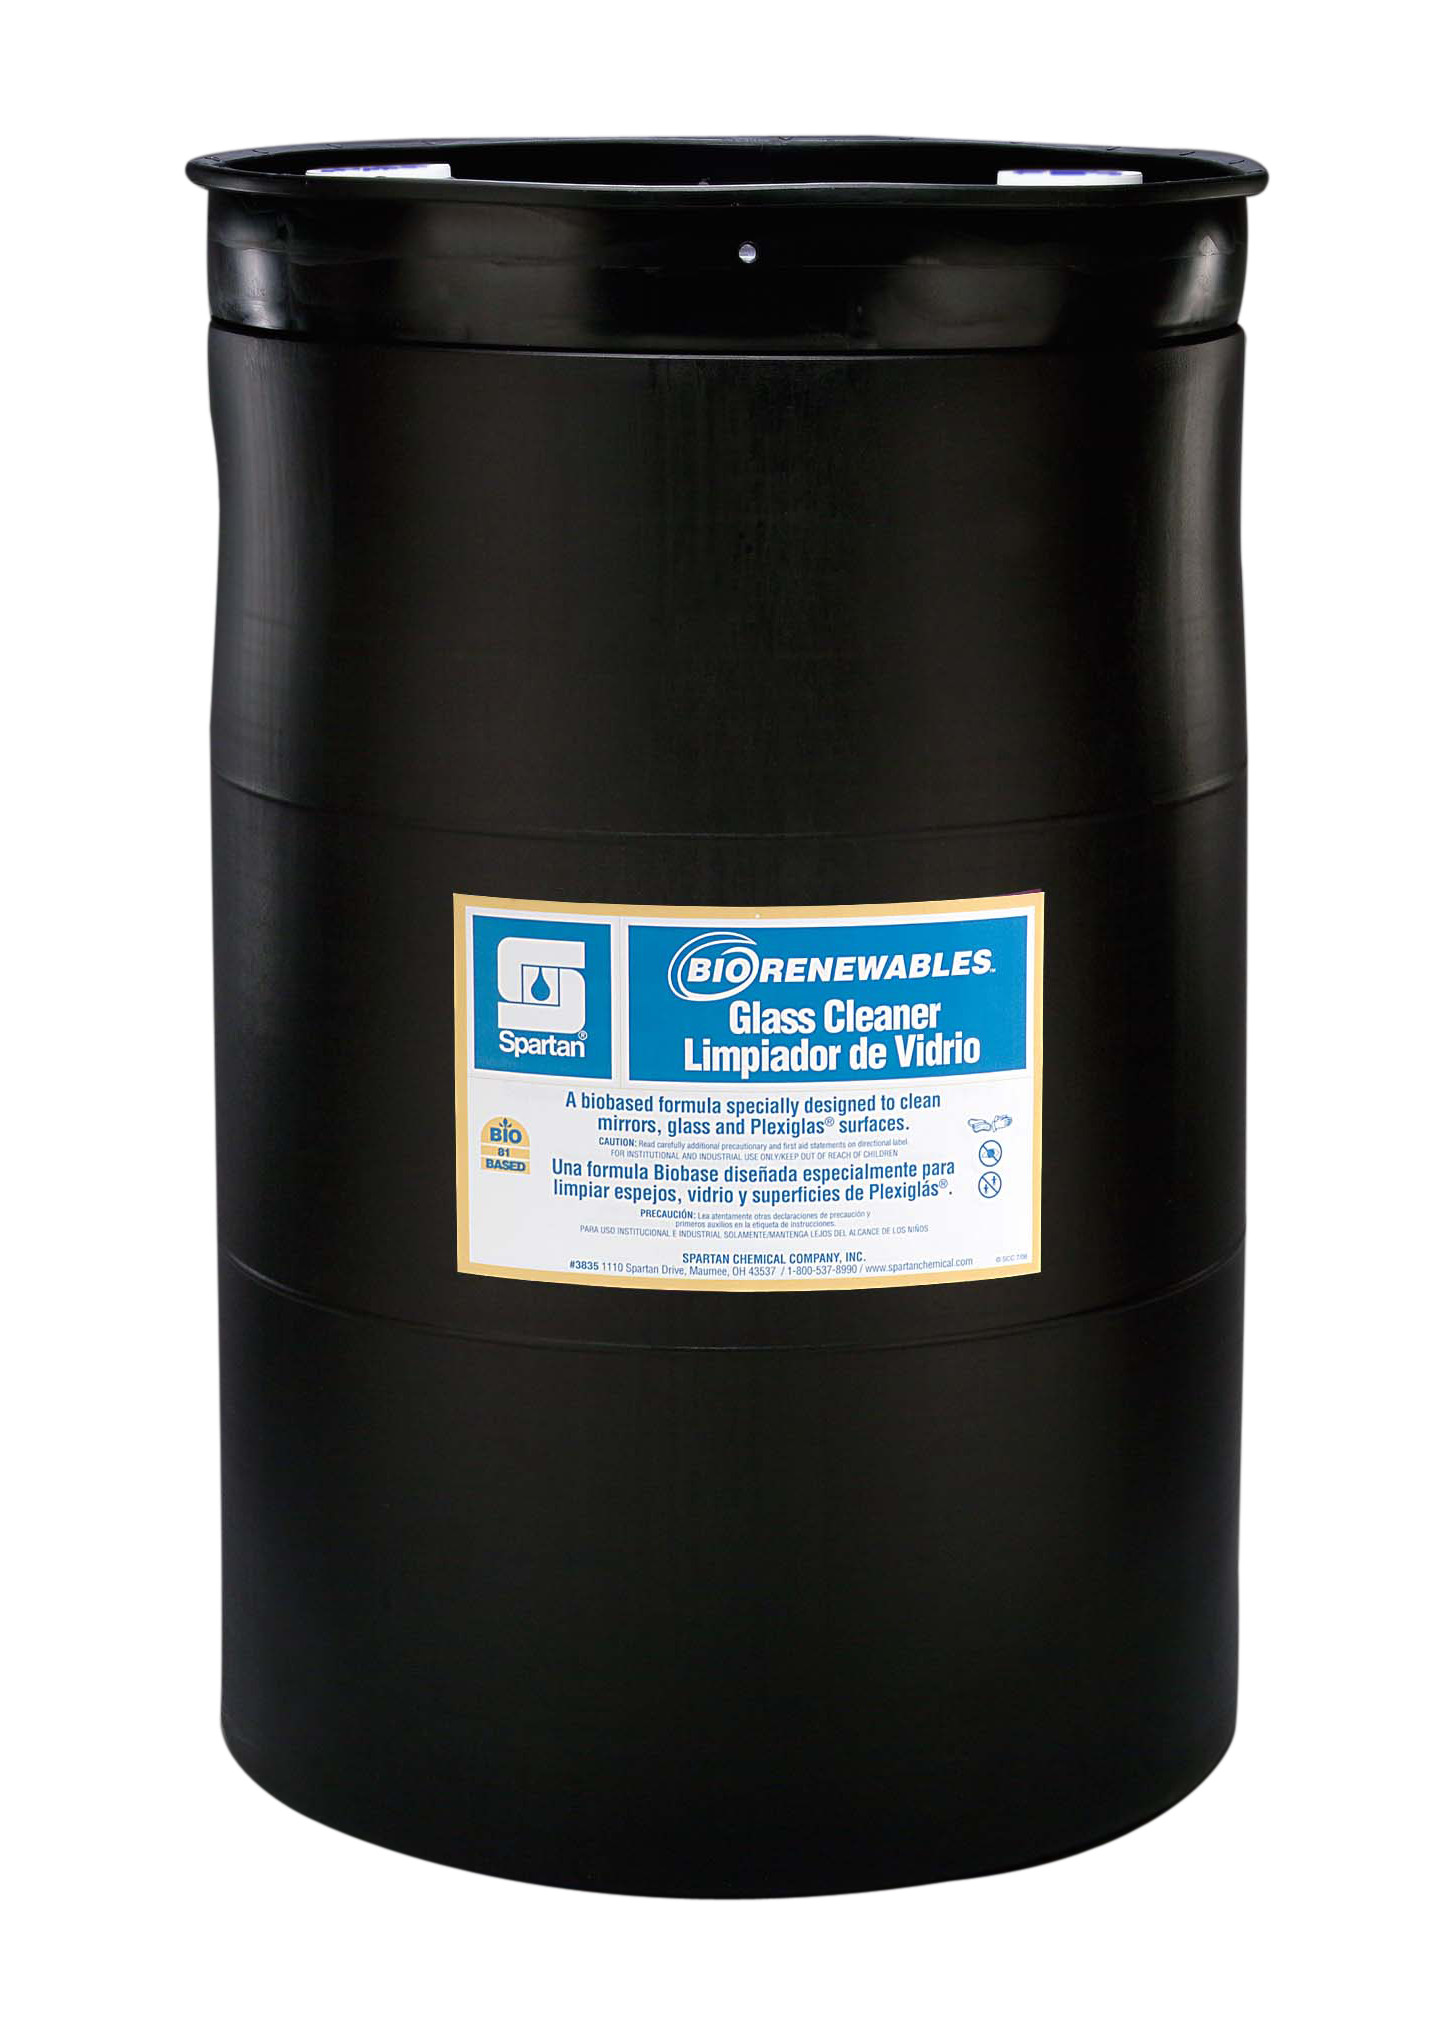 Spartan Chemical Company BioRenewables Glass Cleaner, 55 GAL DRUM